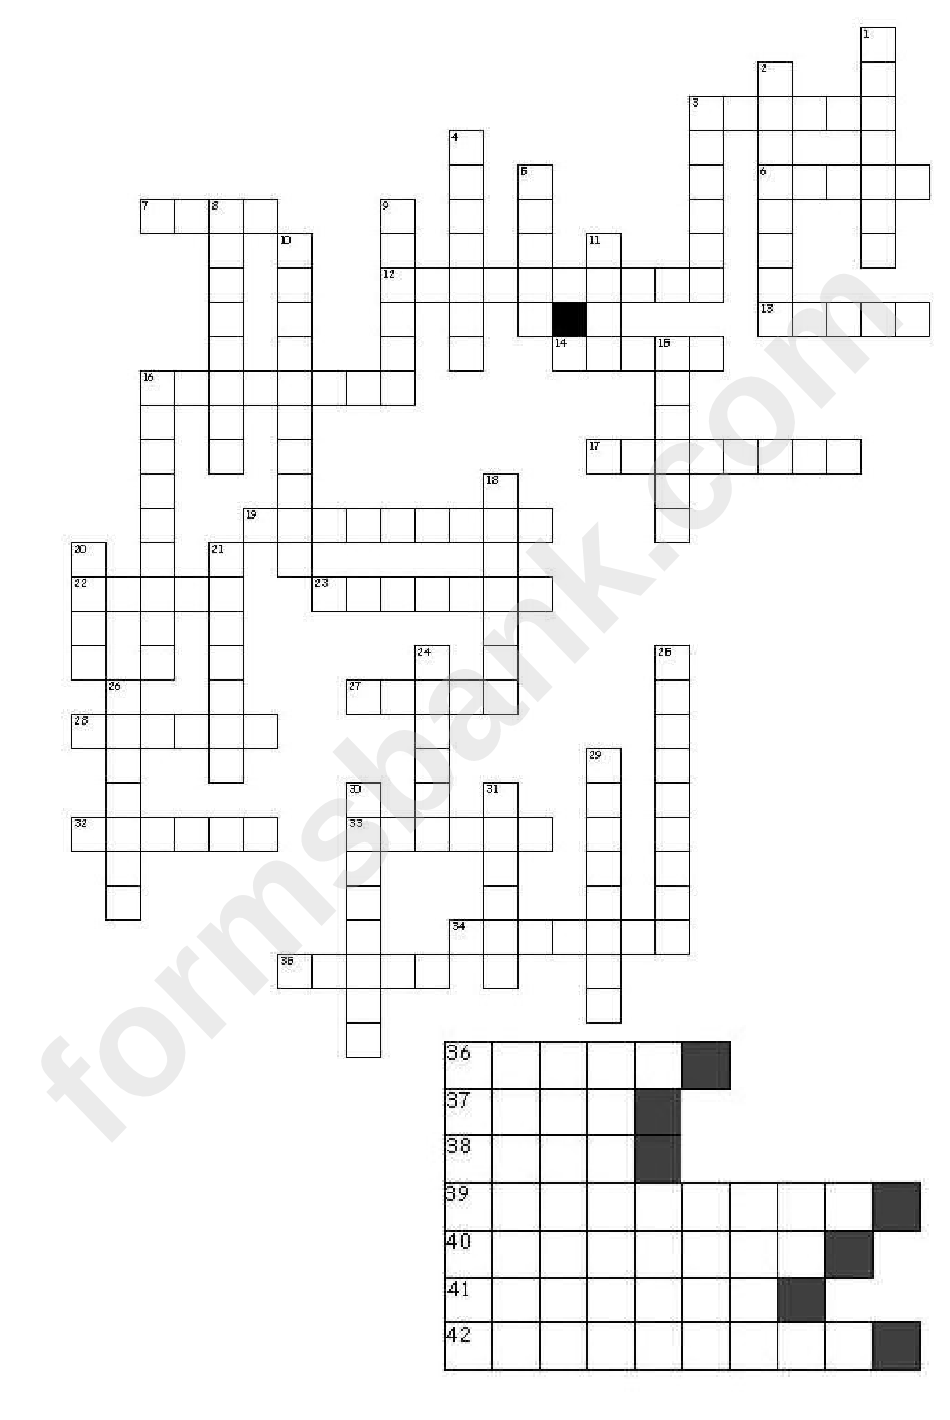 Presidents Of The Usa Crossword Puzzle Template With Answers